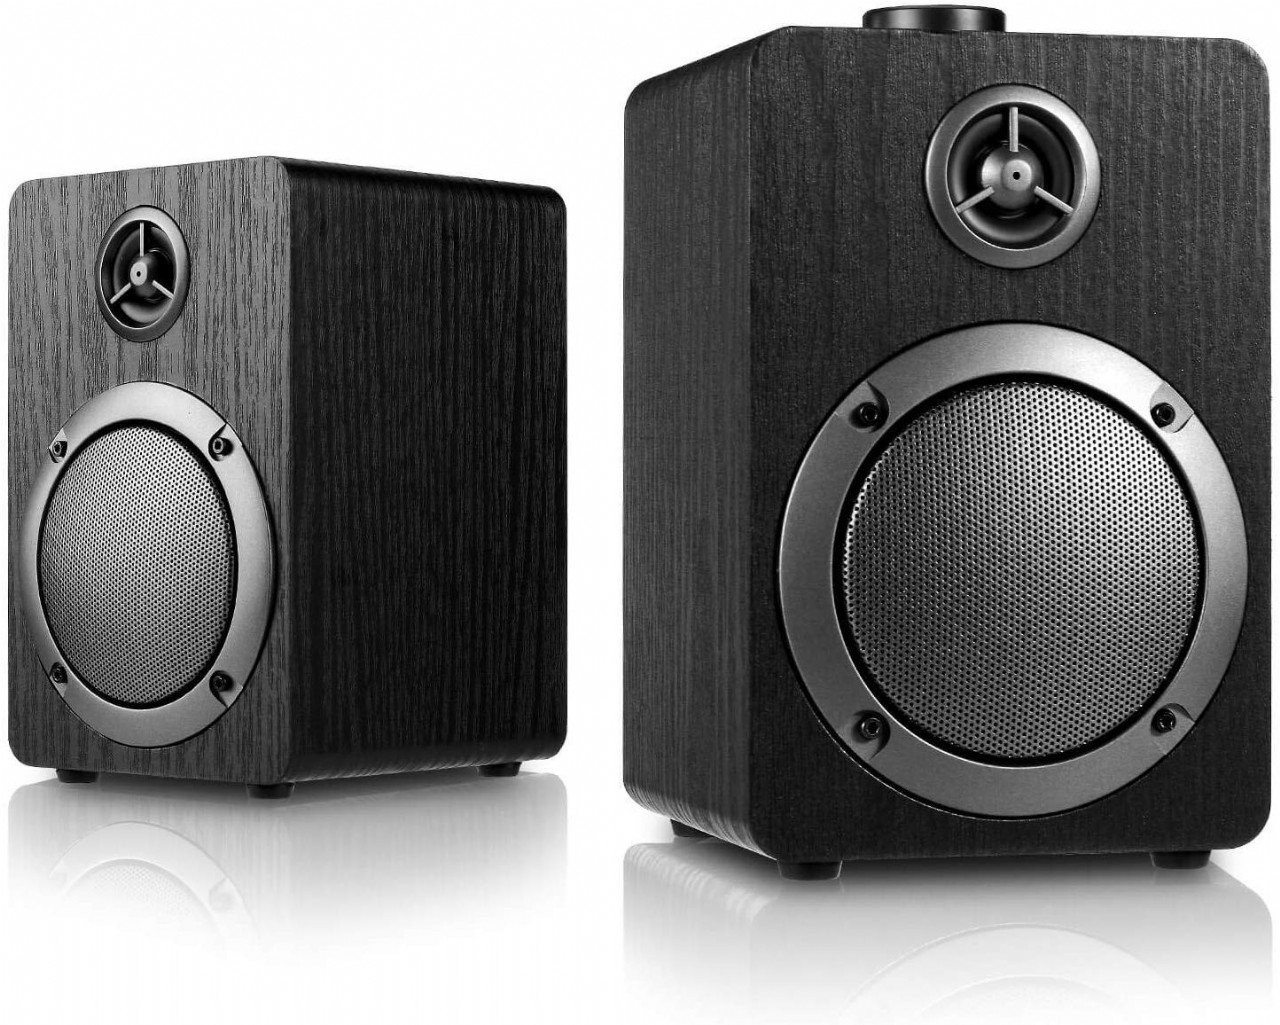 USB-Powered PC Computer Speakers; Mica PB20 with 2.0CH Surround Sound, Wooden Wired LED Volume